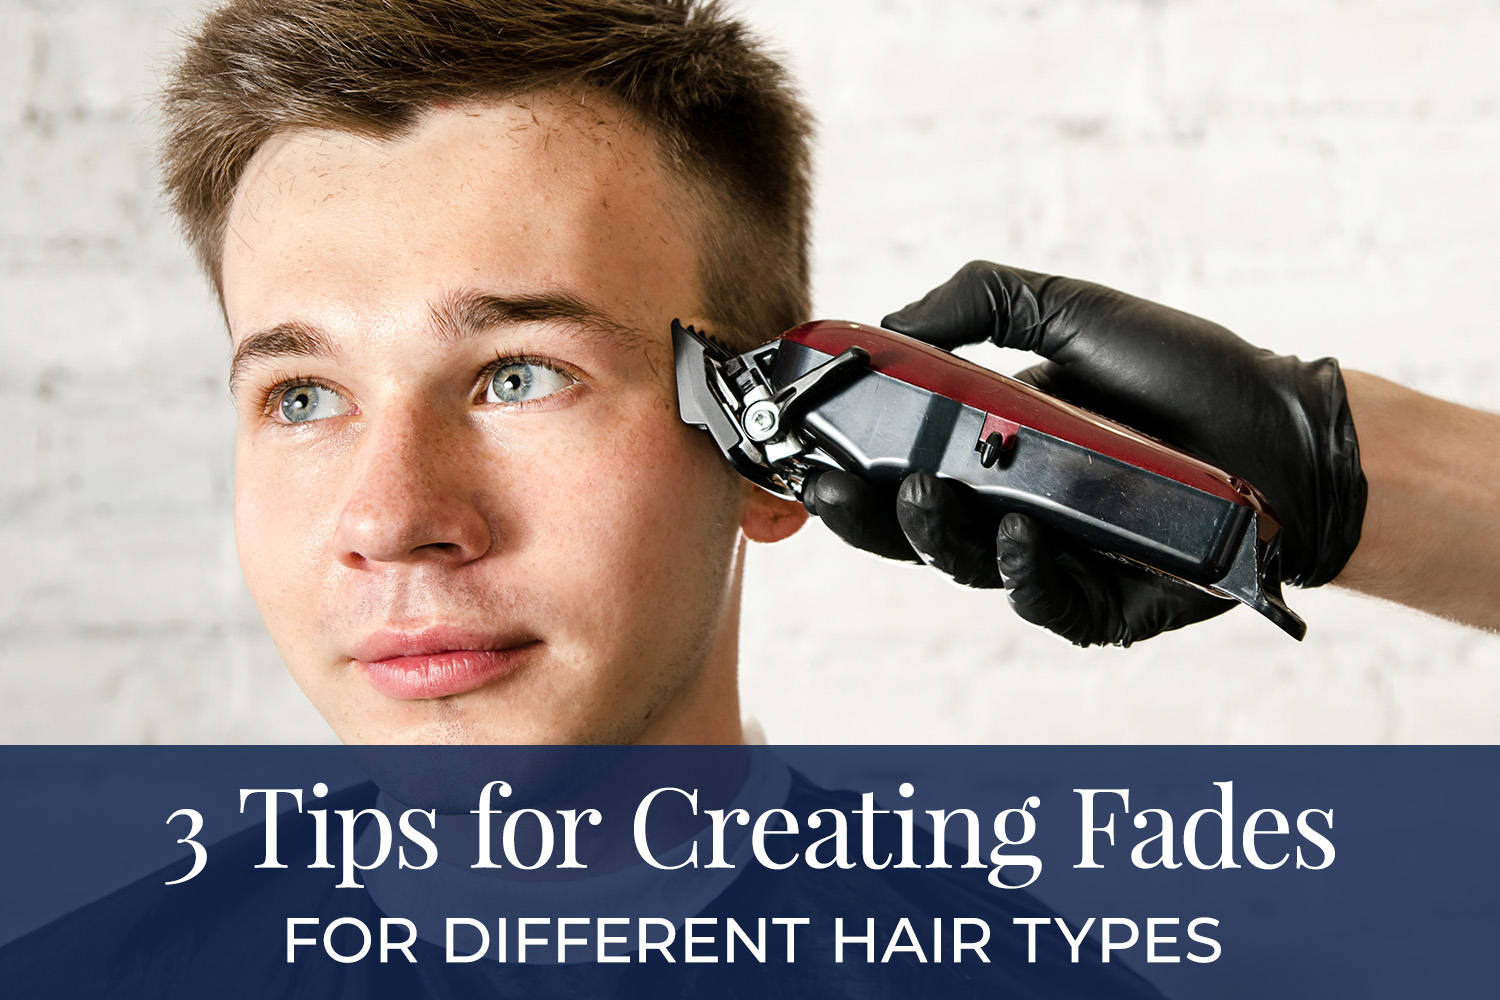 Tips for creating fades for different hair types